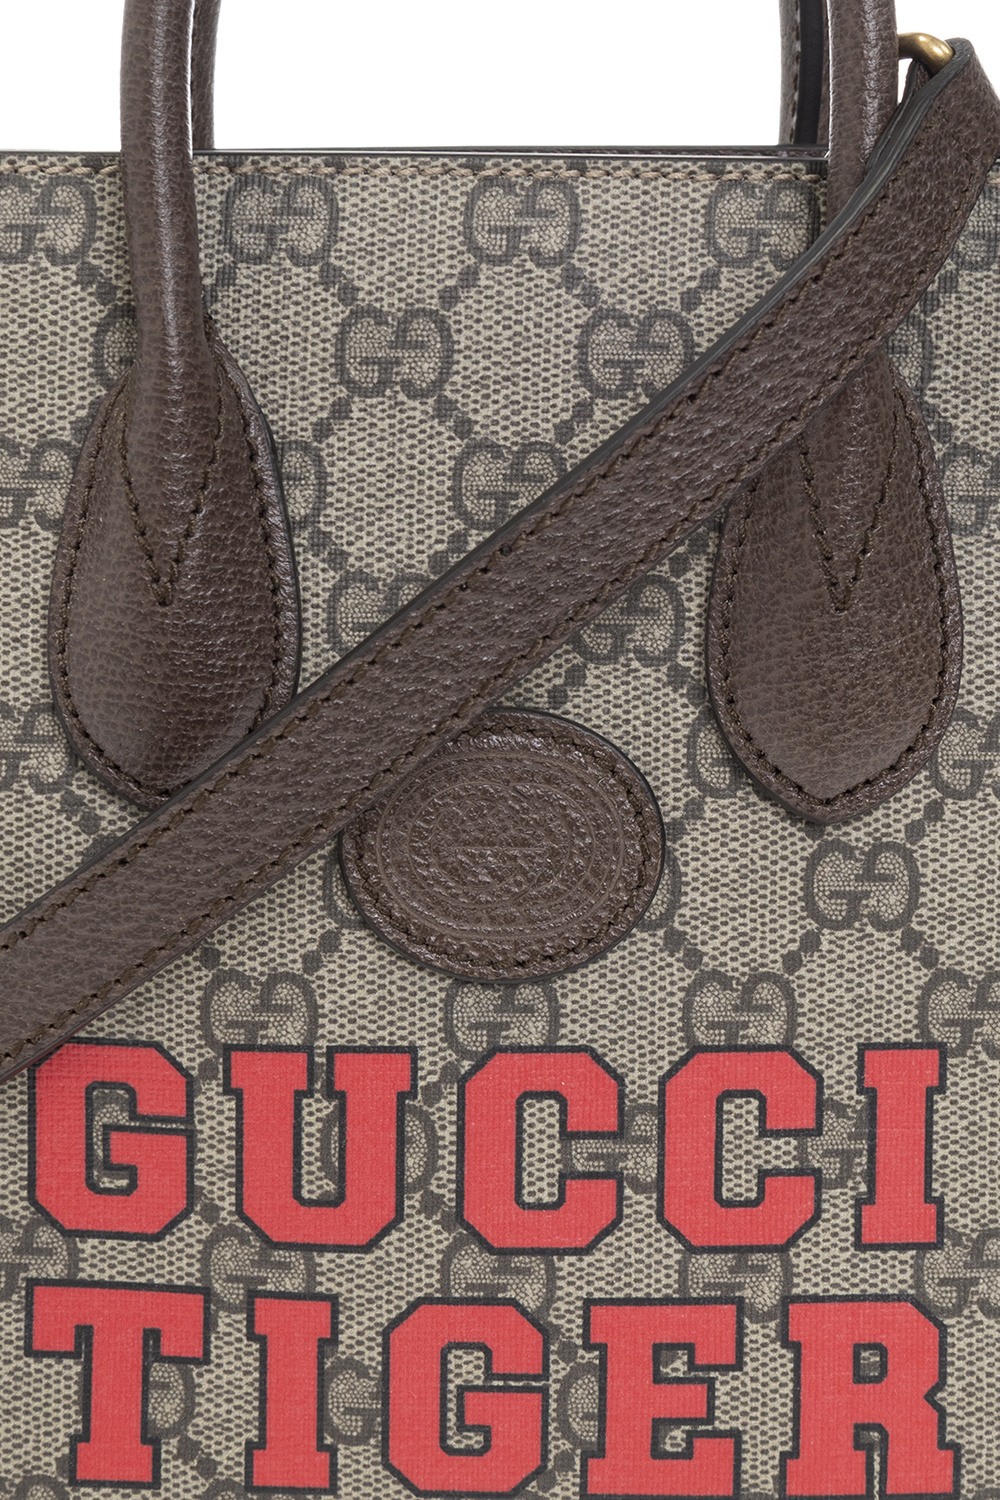 Gucci iPhone Case Supreme GG Tiger 7/8 Beige in Coated Canvas - US